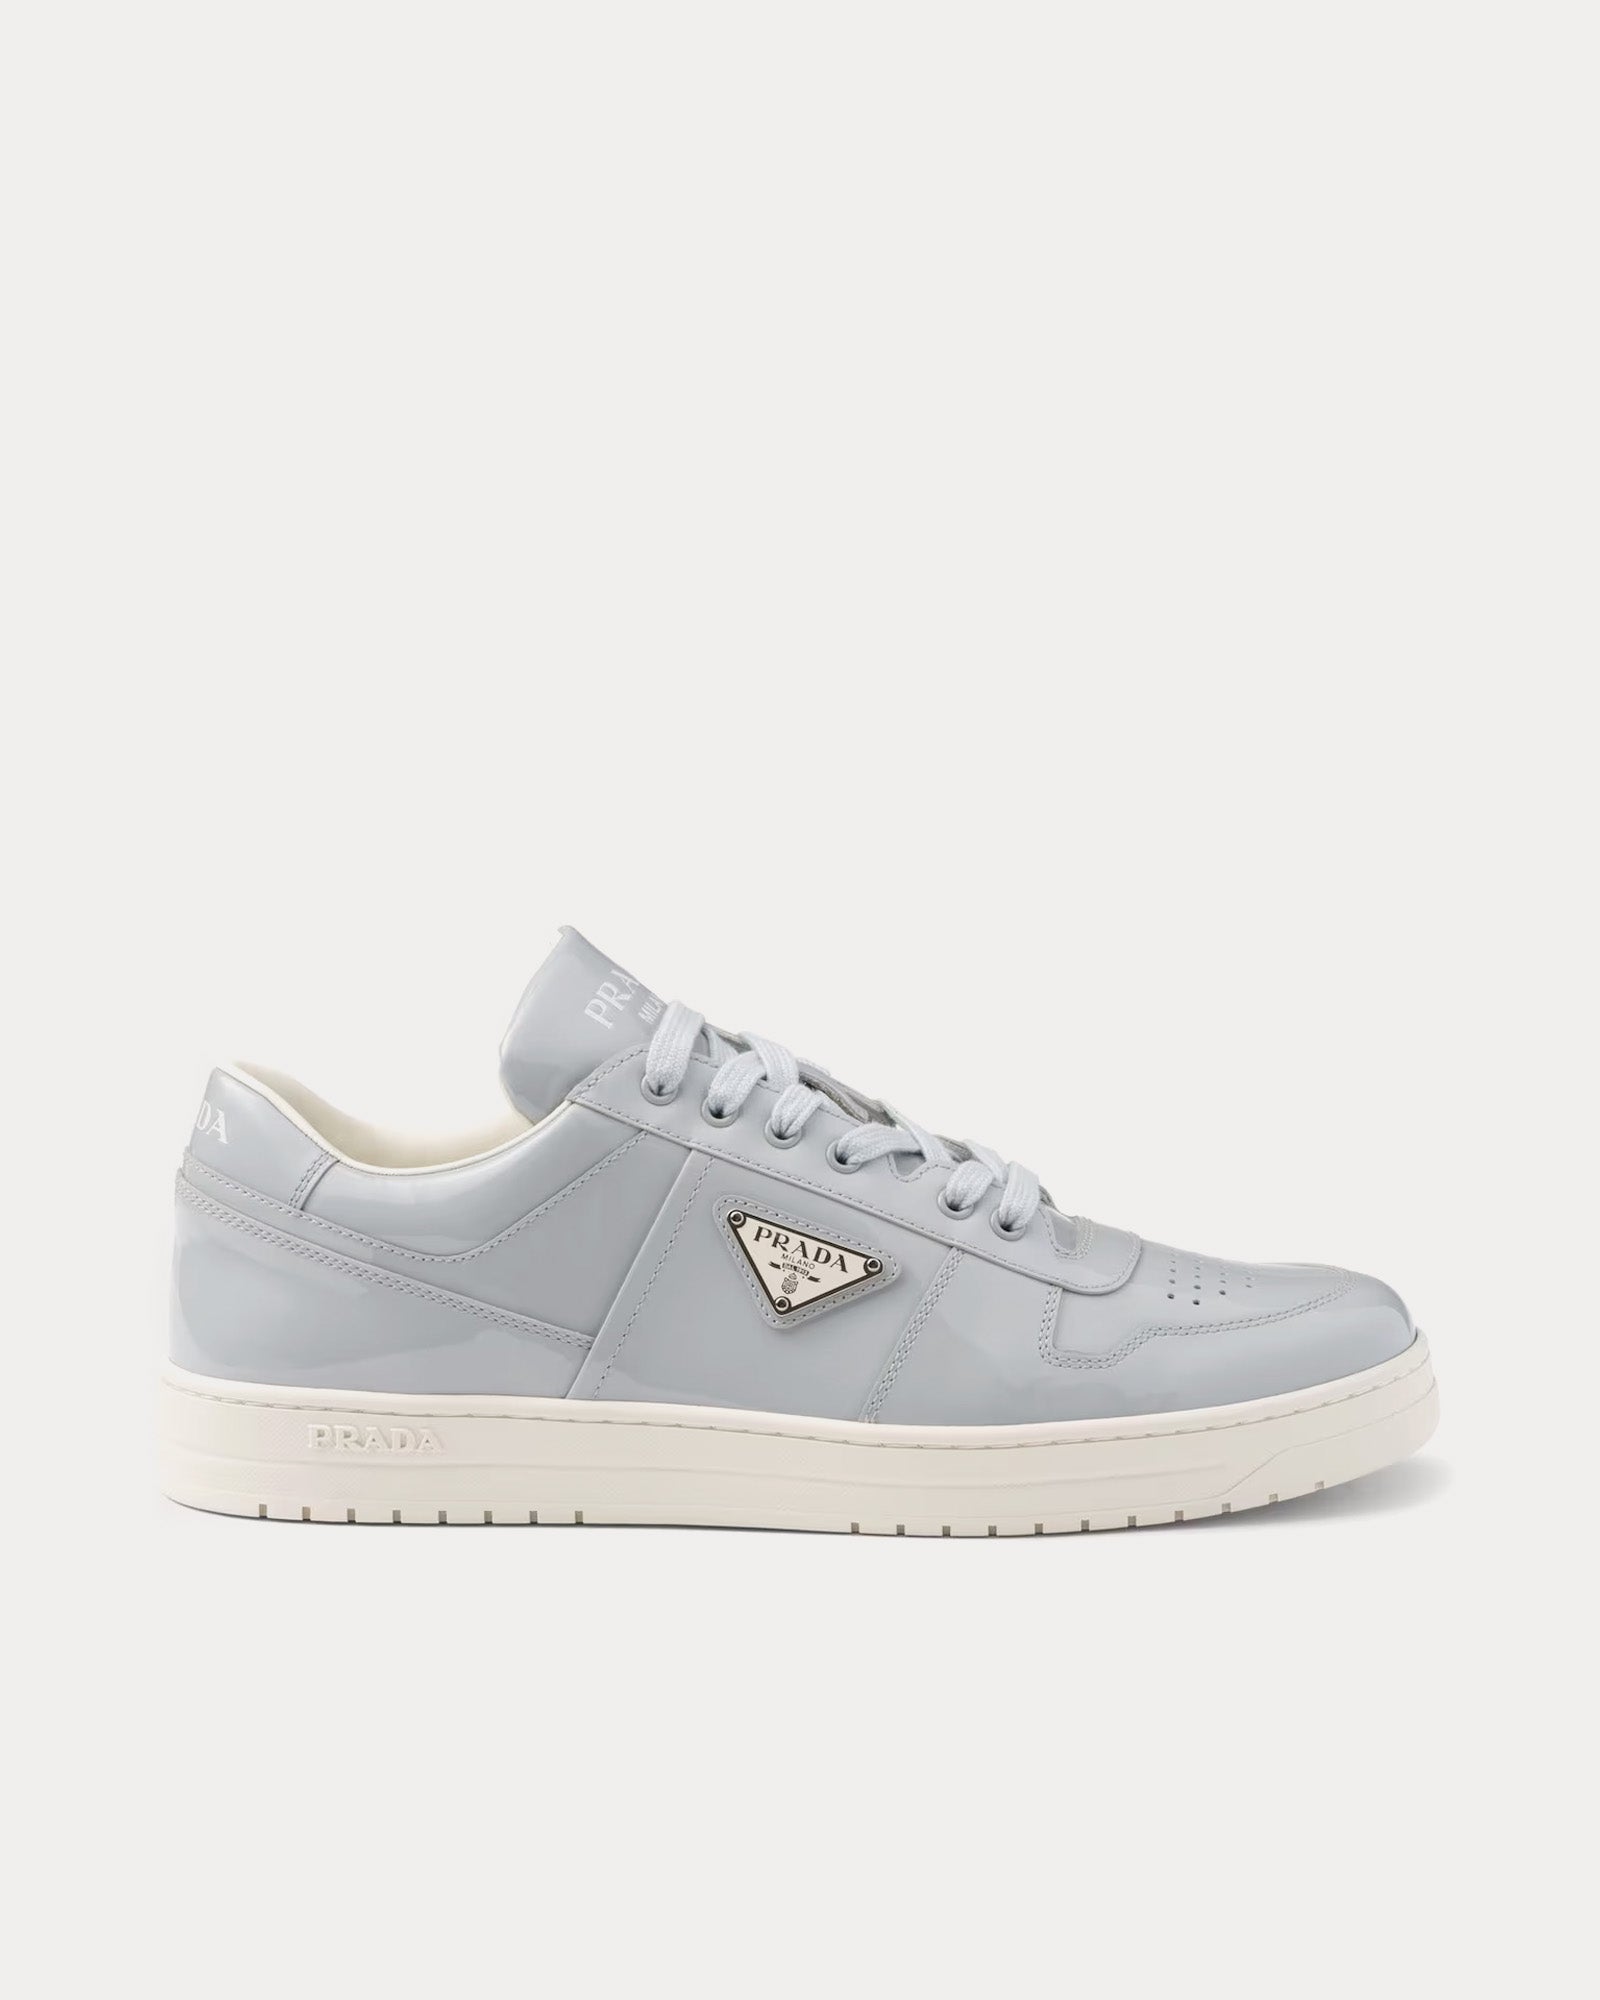 Prada - Downtown Patent Leather Cornflower Low Top Sneakers